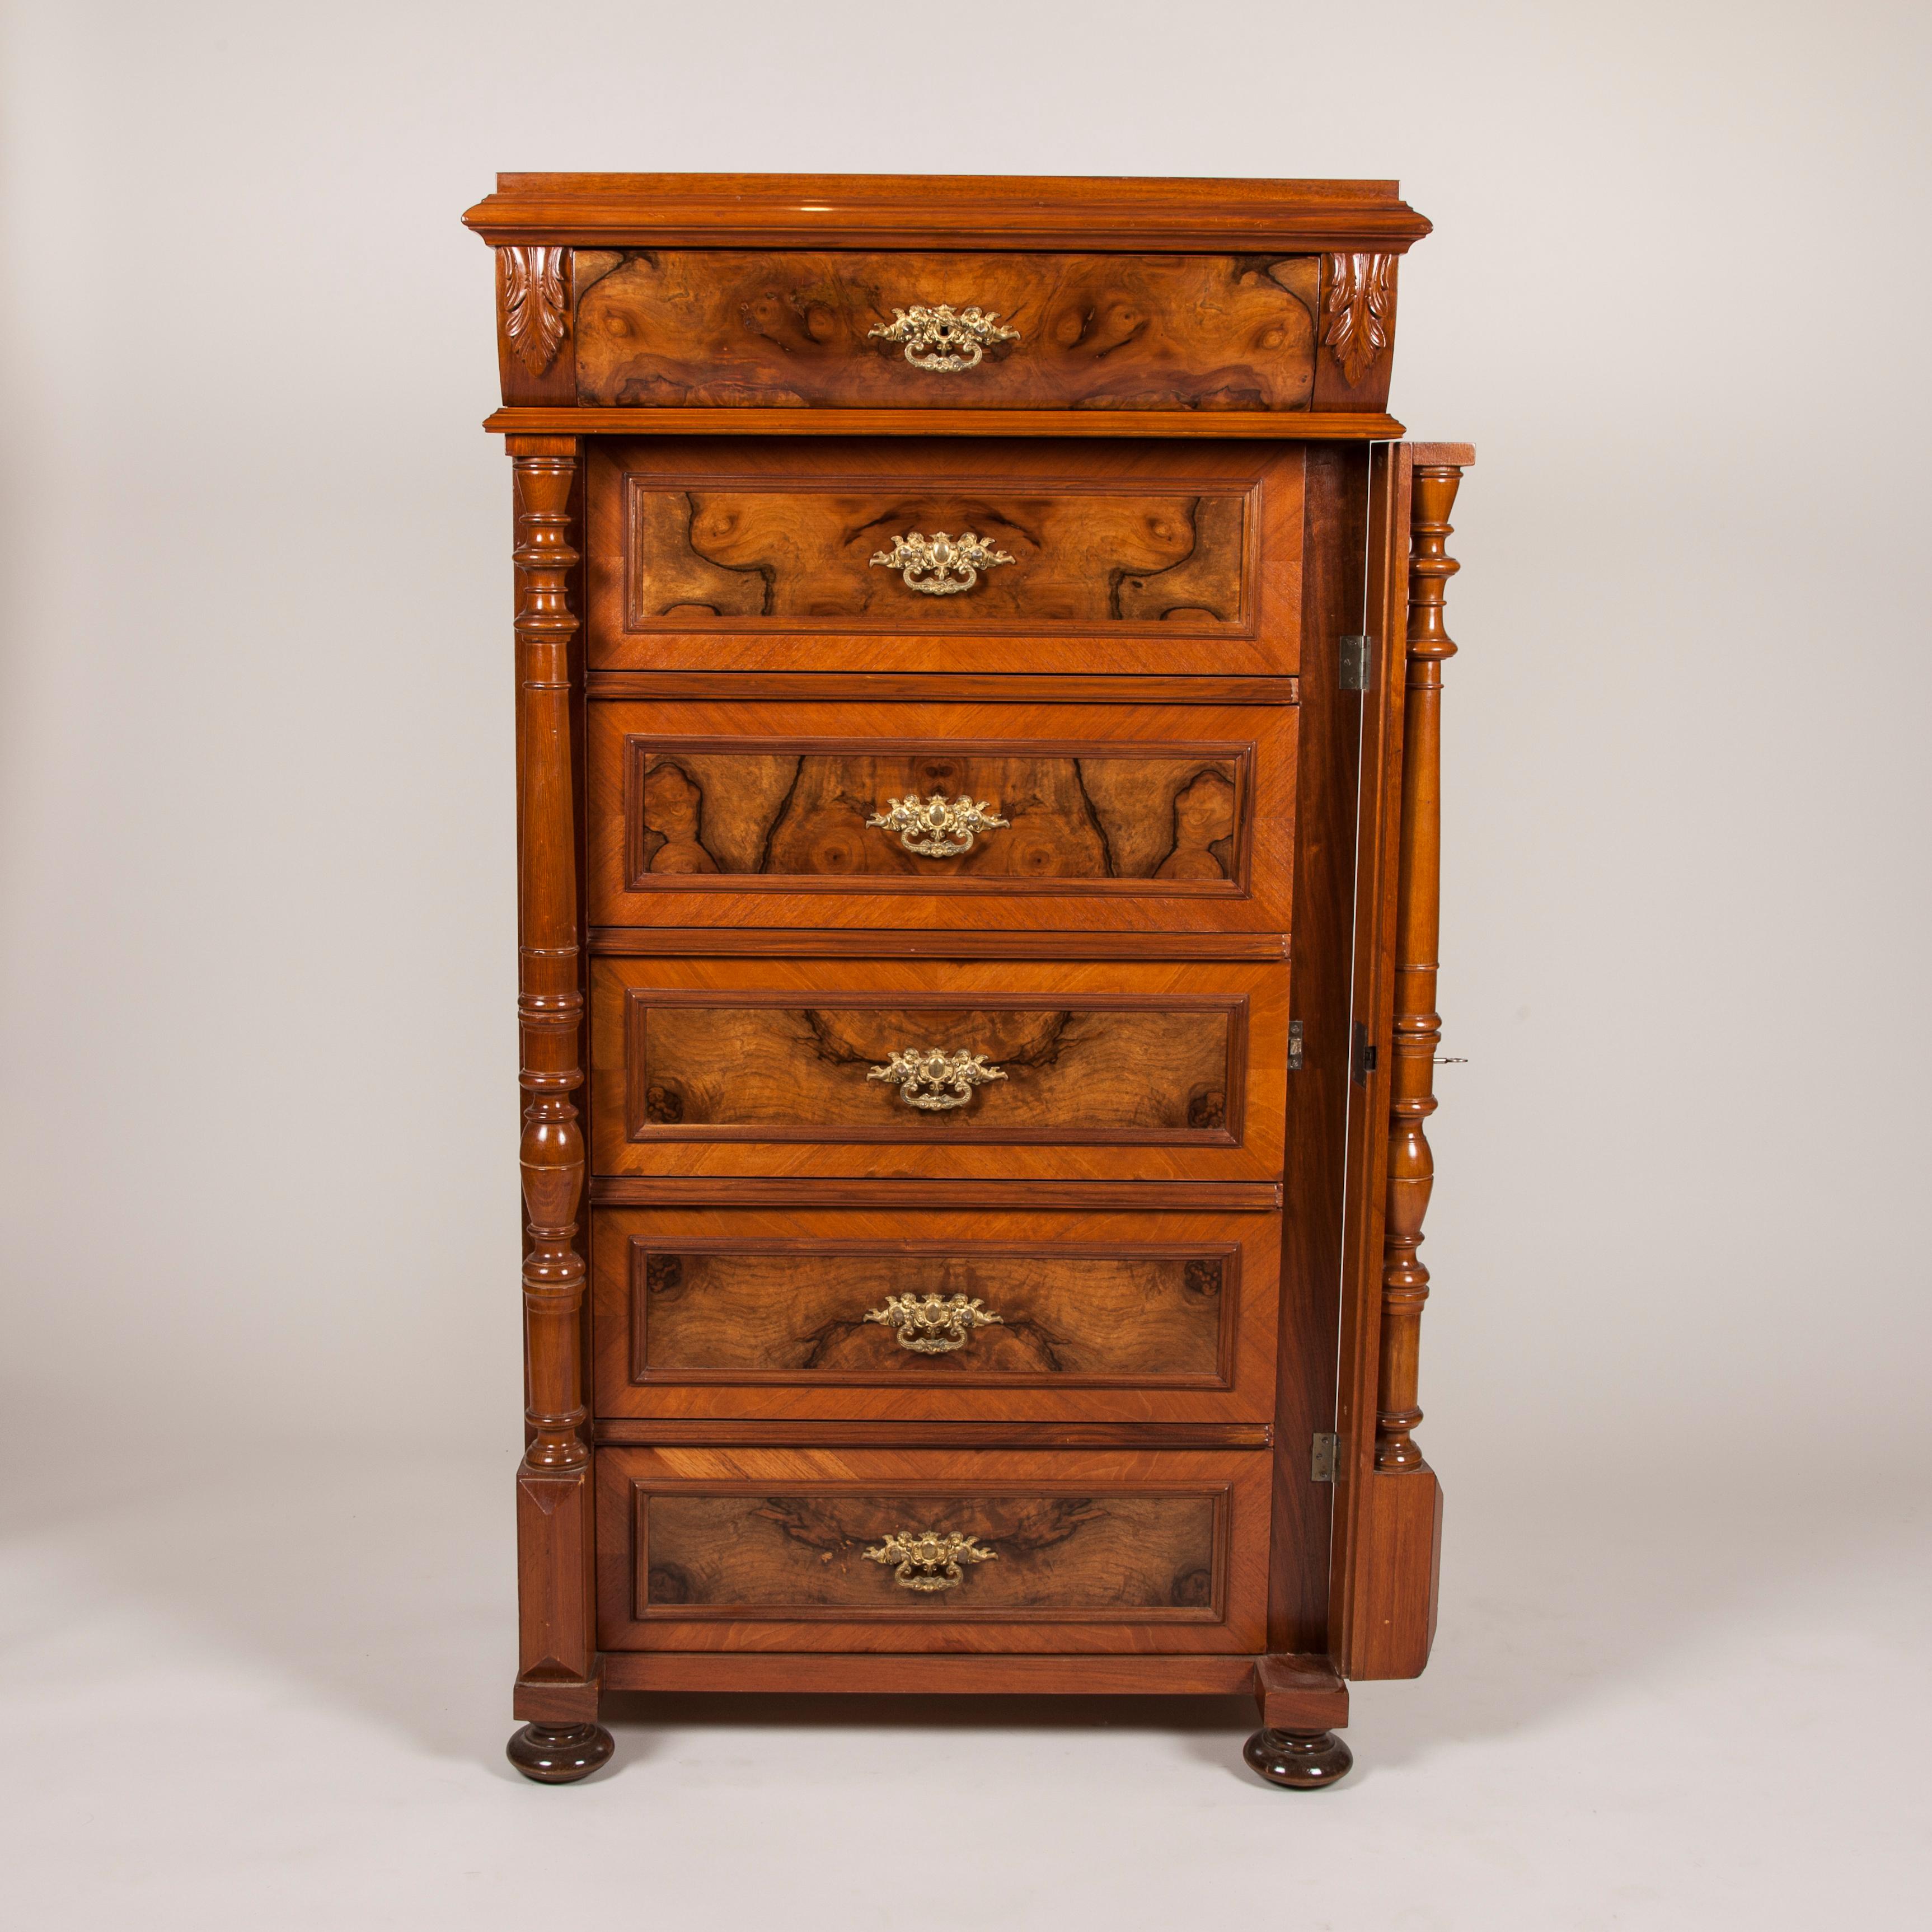 A walnut and burr walnut chest of drawers with ormolu mounts and locking pilaster, six graduating drawers.